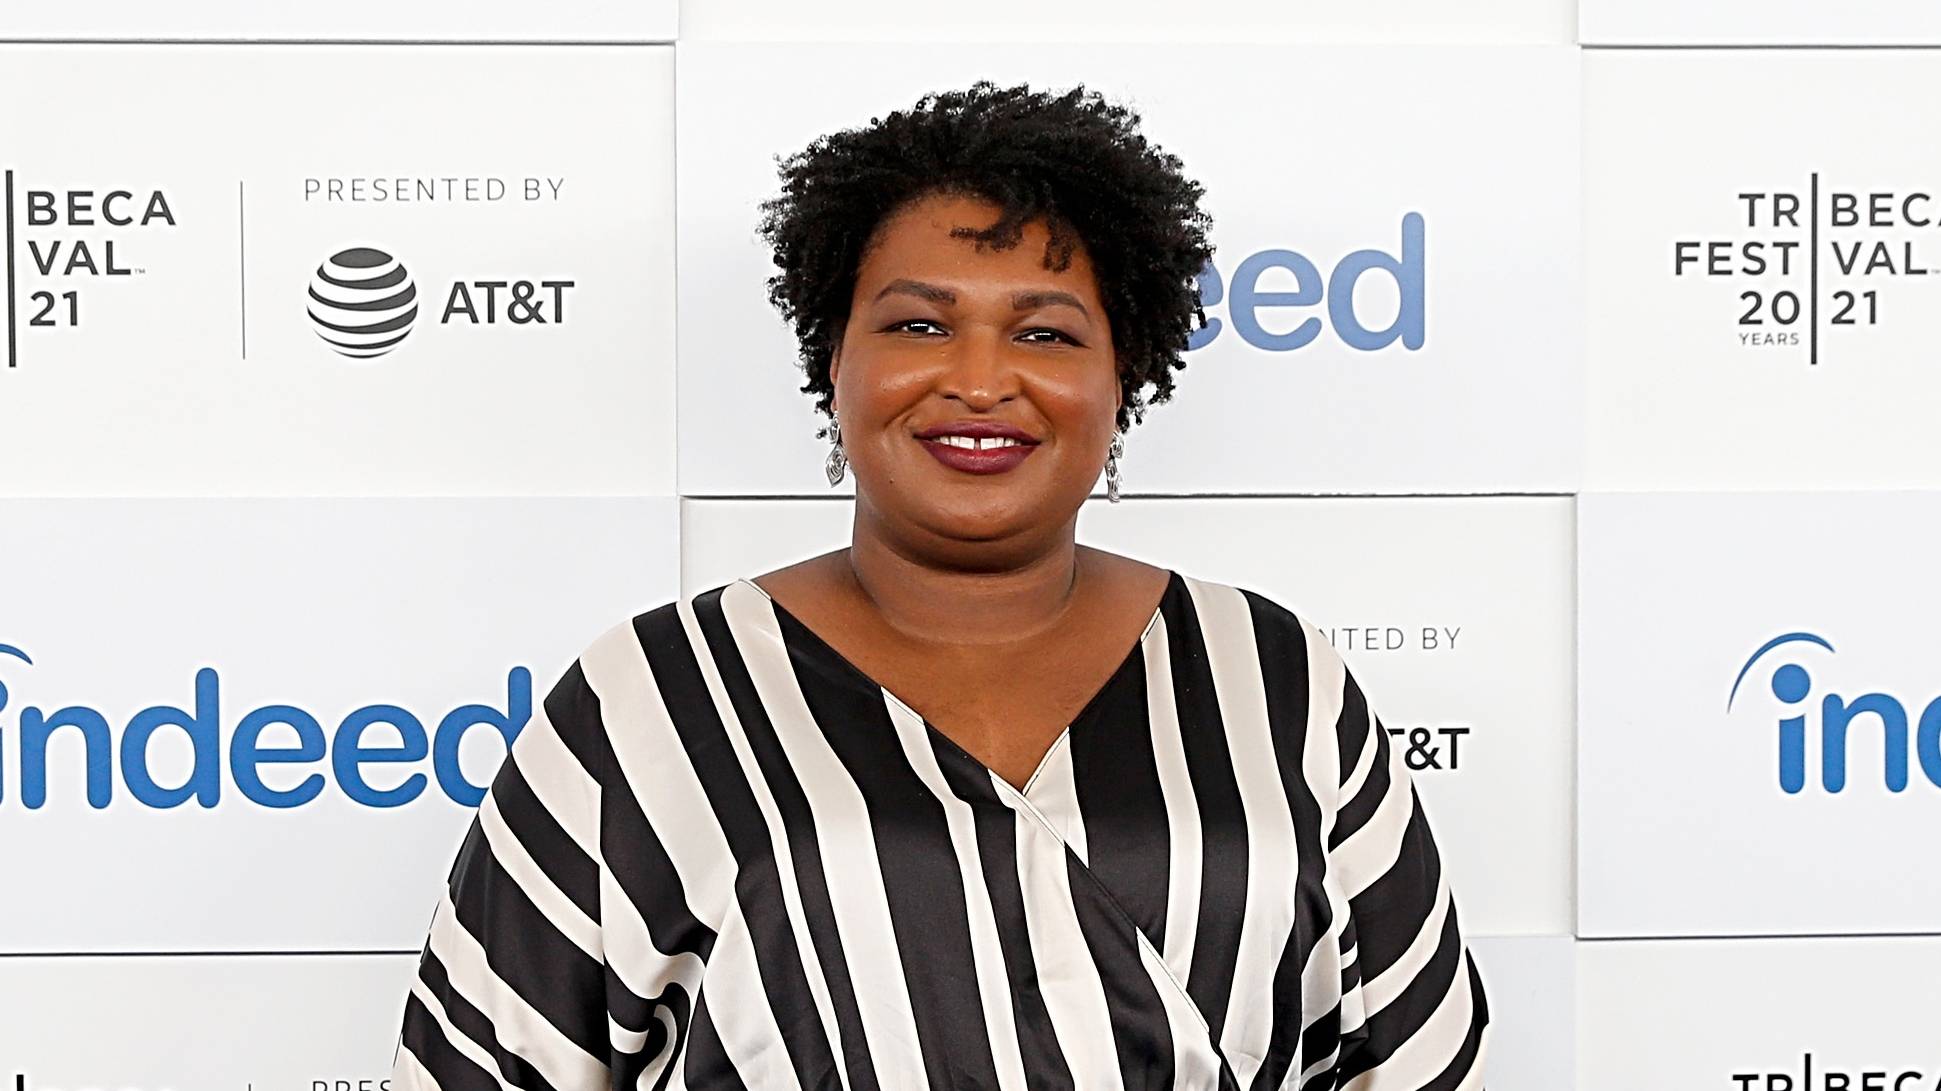 Stacey Abrams attends the 2021 Tribeca Festival Belafonte Awards at Battery Park on June 19, 2021 in New York City. 